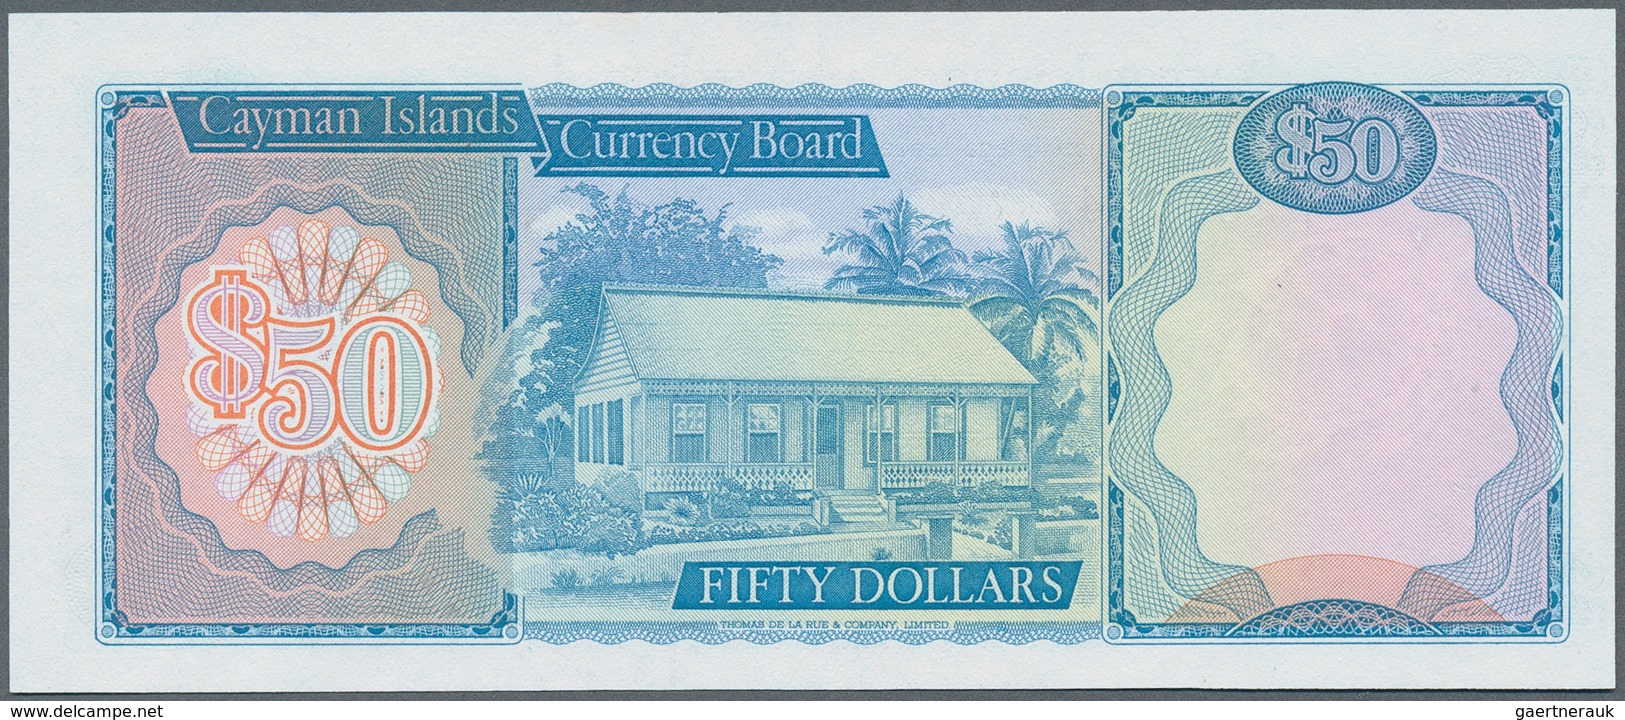 01264 Cayman Islands: 50 Dollras L.1974, P. 10 In Condition: UNC. - Iles Cayman